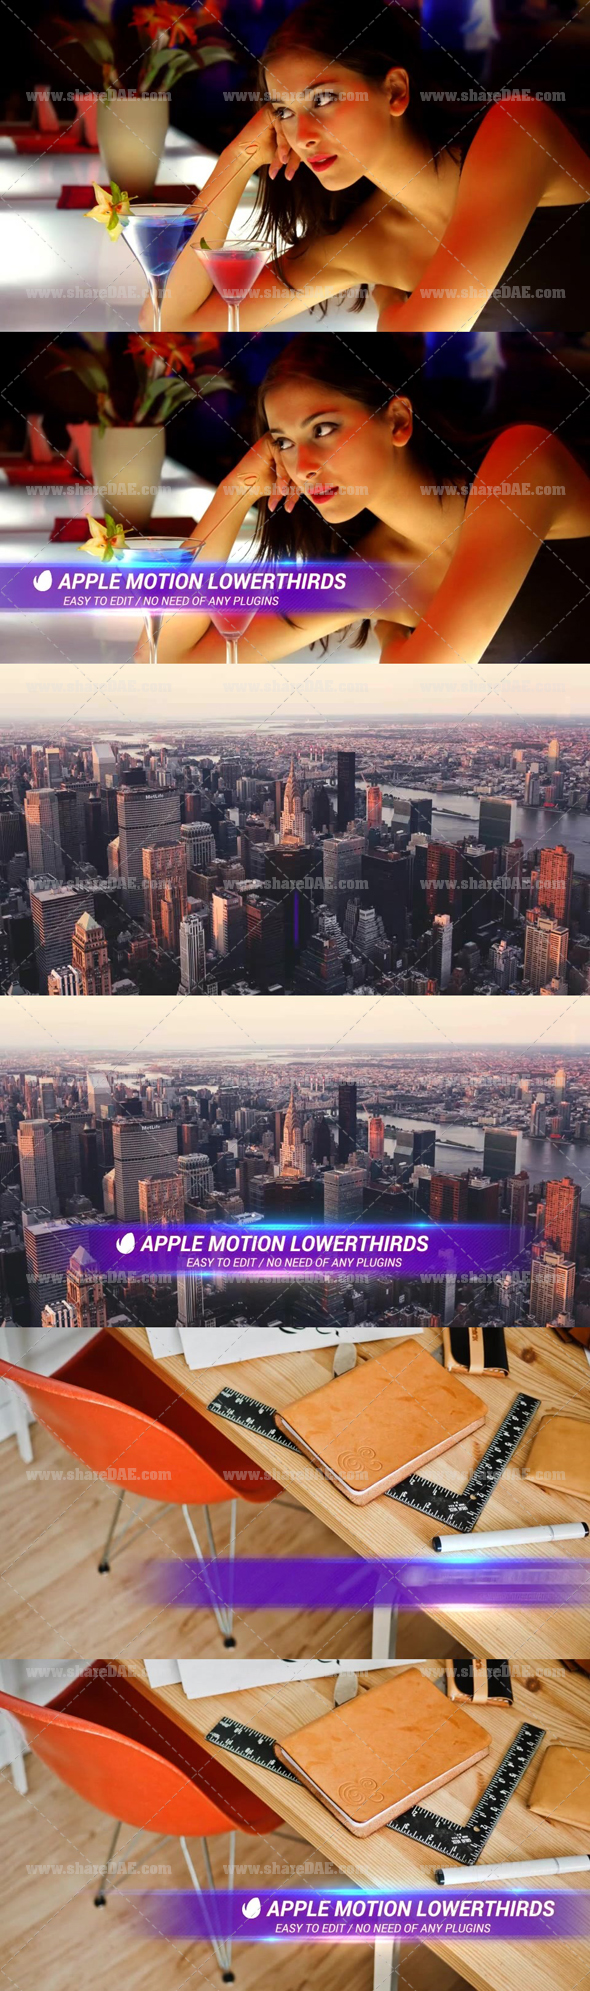 Videohive - Simple Lowerthird 11371460 [for FCPX] - Free Download 